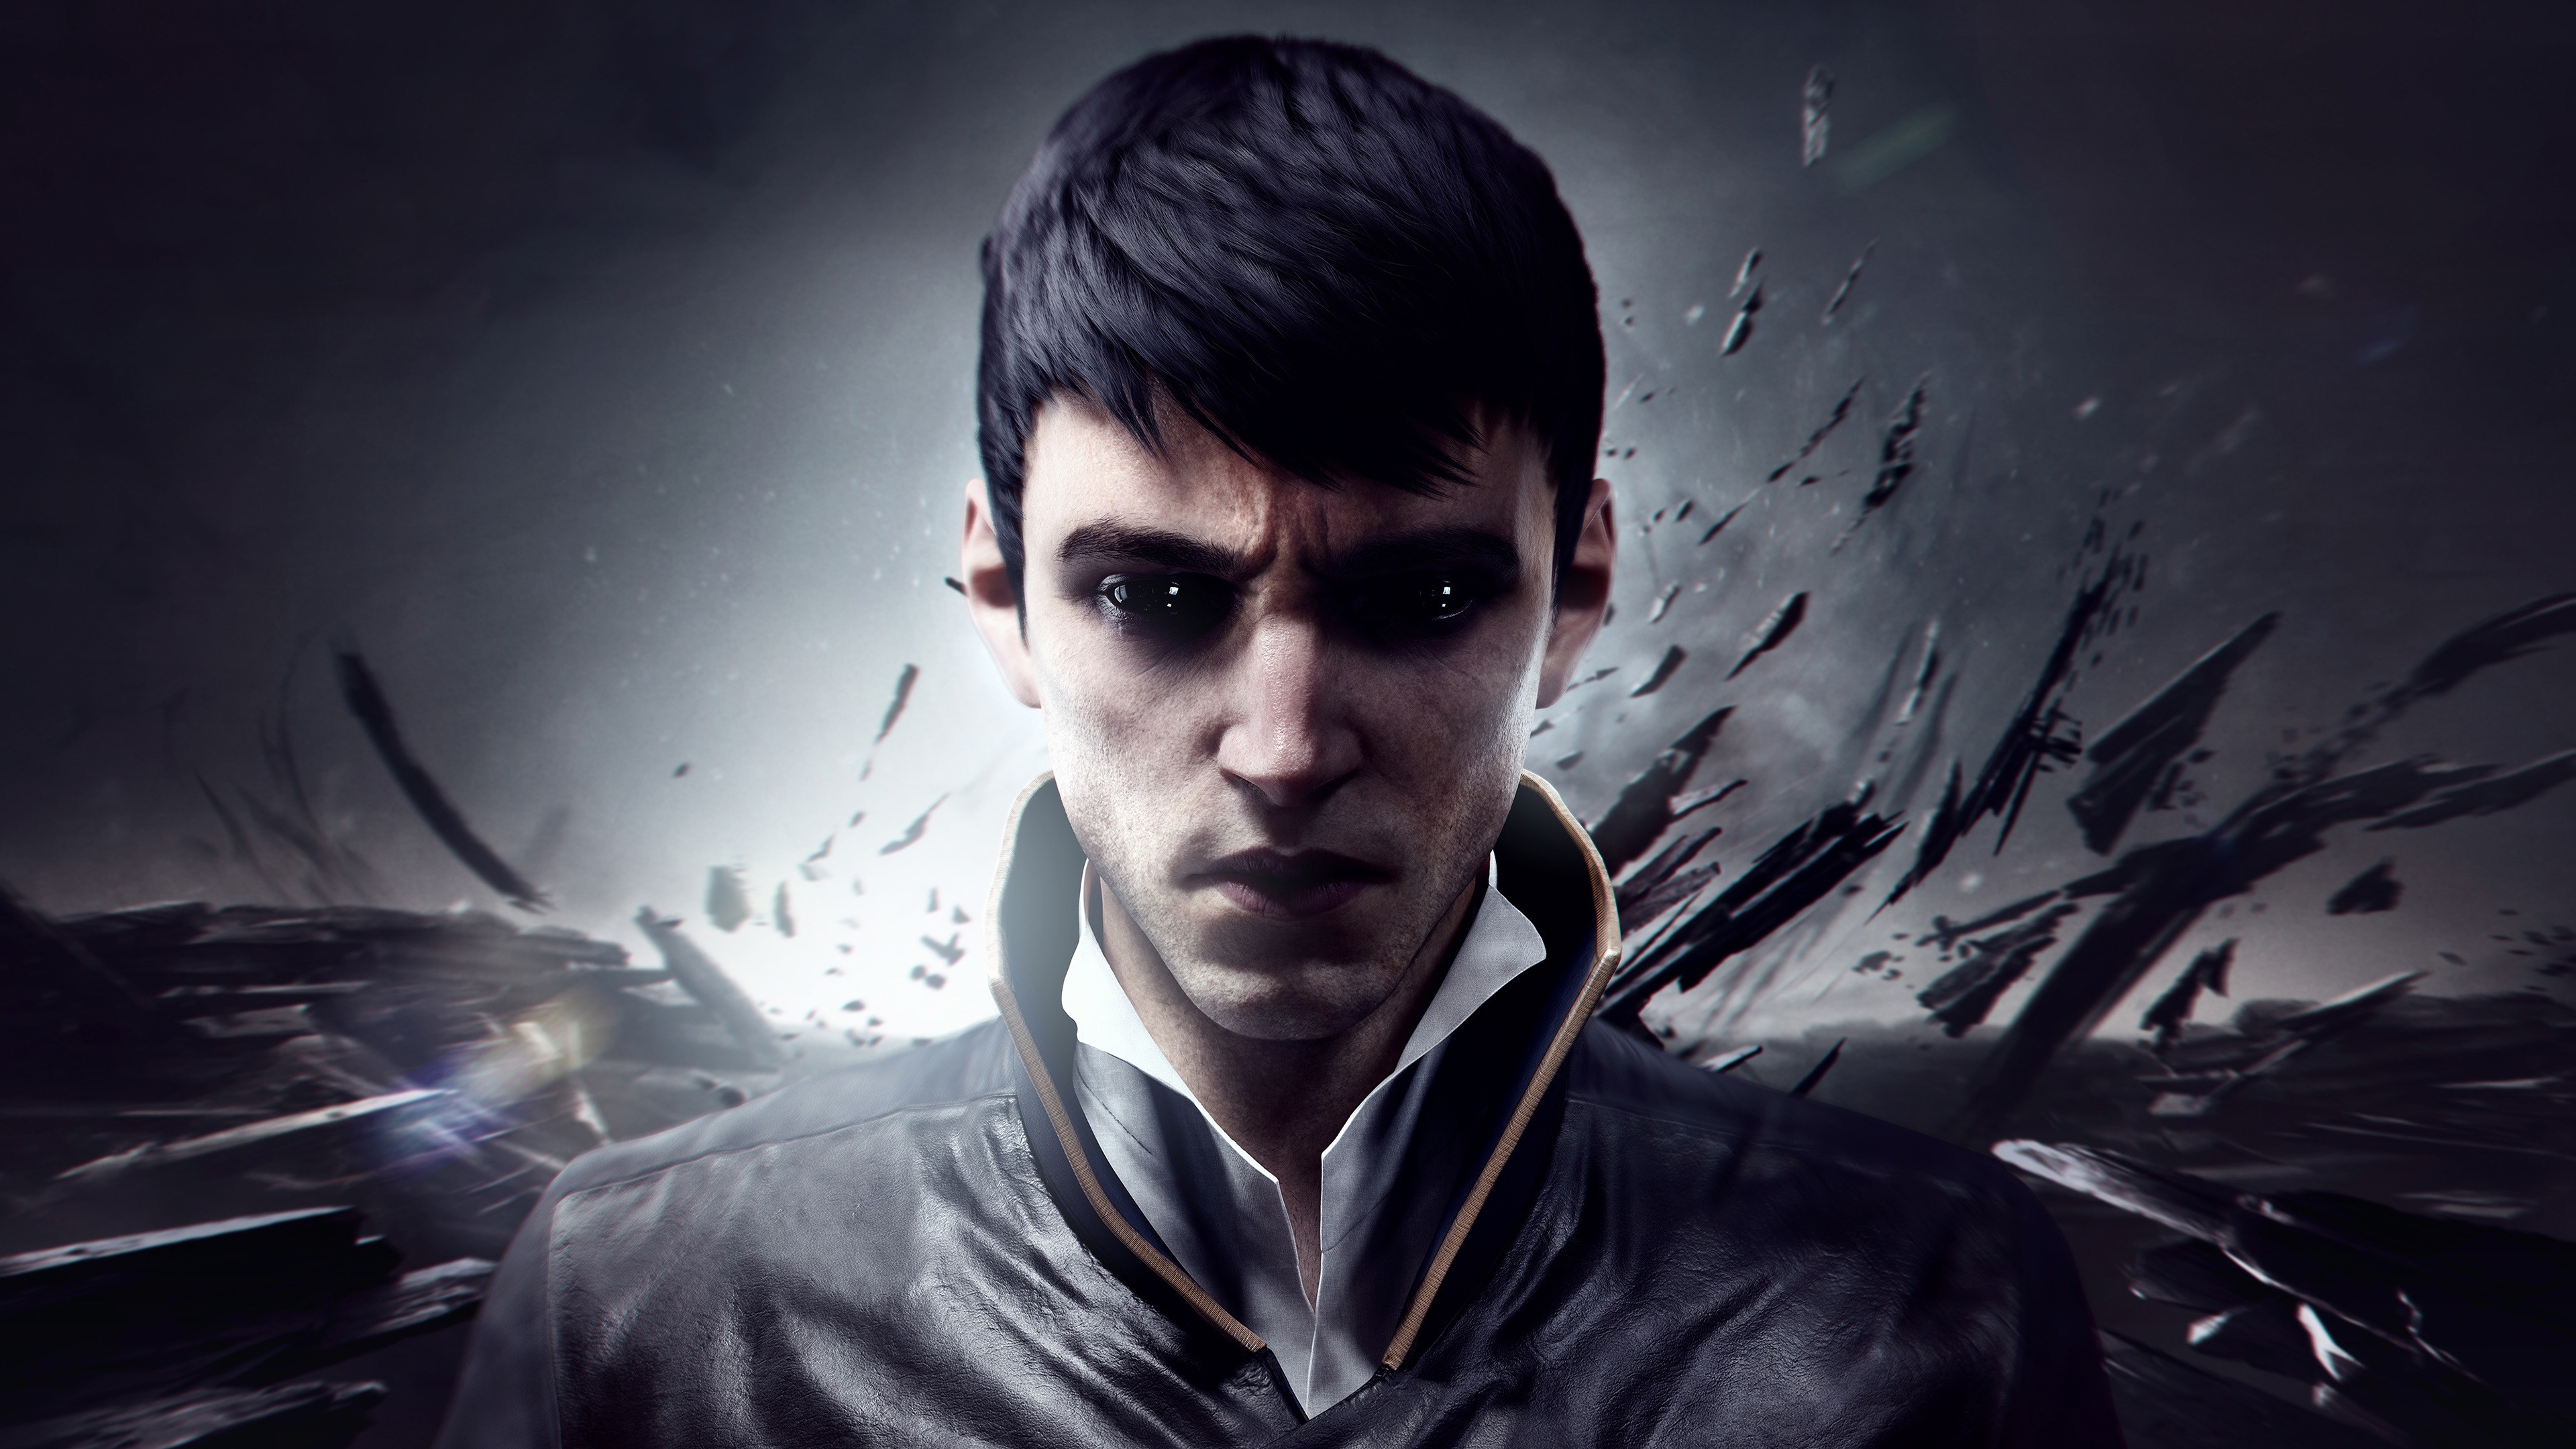 Wallpaper Dishonored Video Game Man UHD 4k Picture